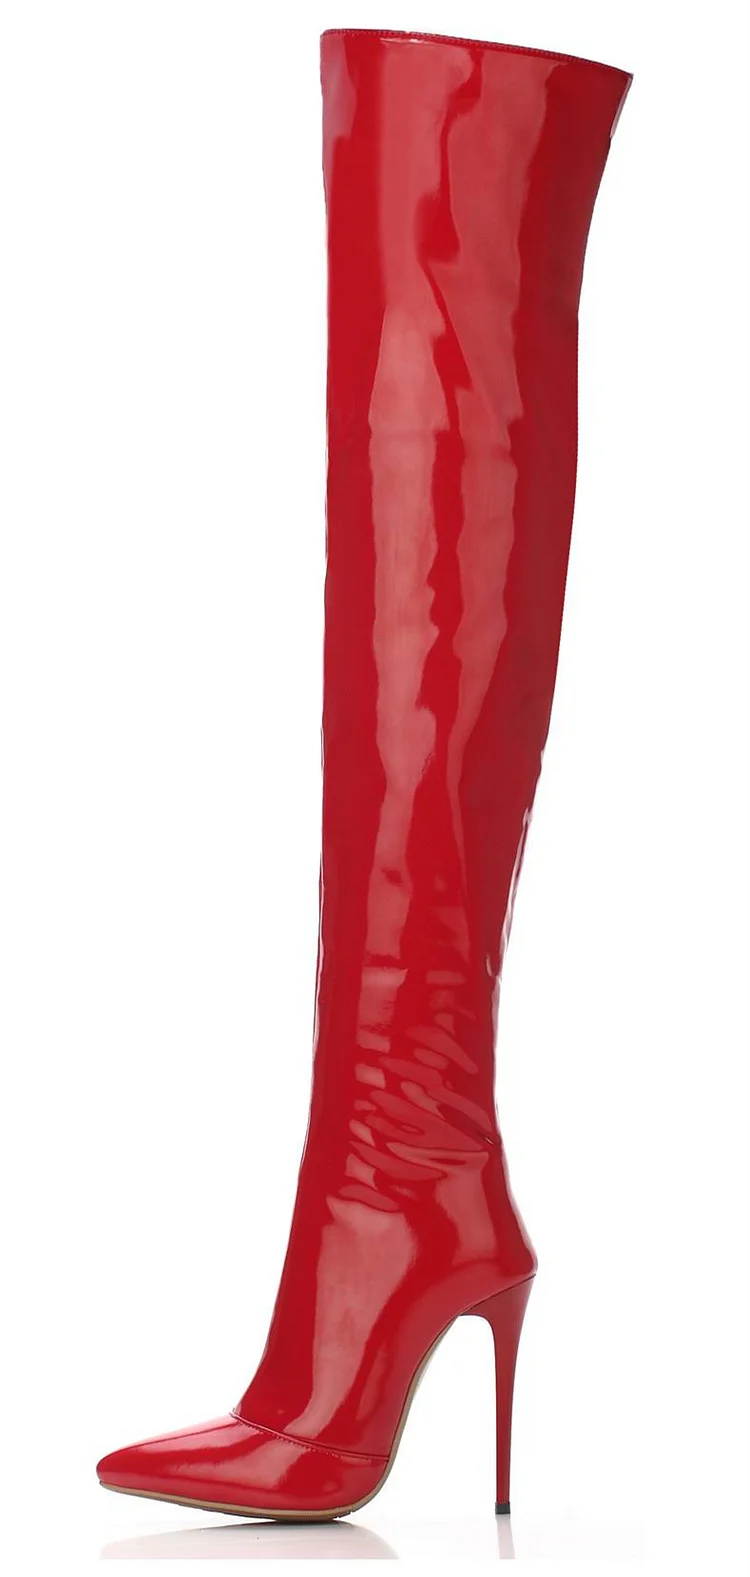 Red Patent Leather Over-the-knee Stiletto Heel Long Boots Vdcoo